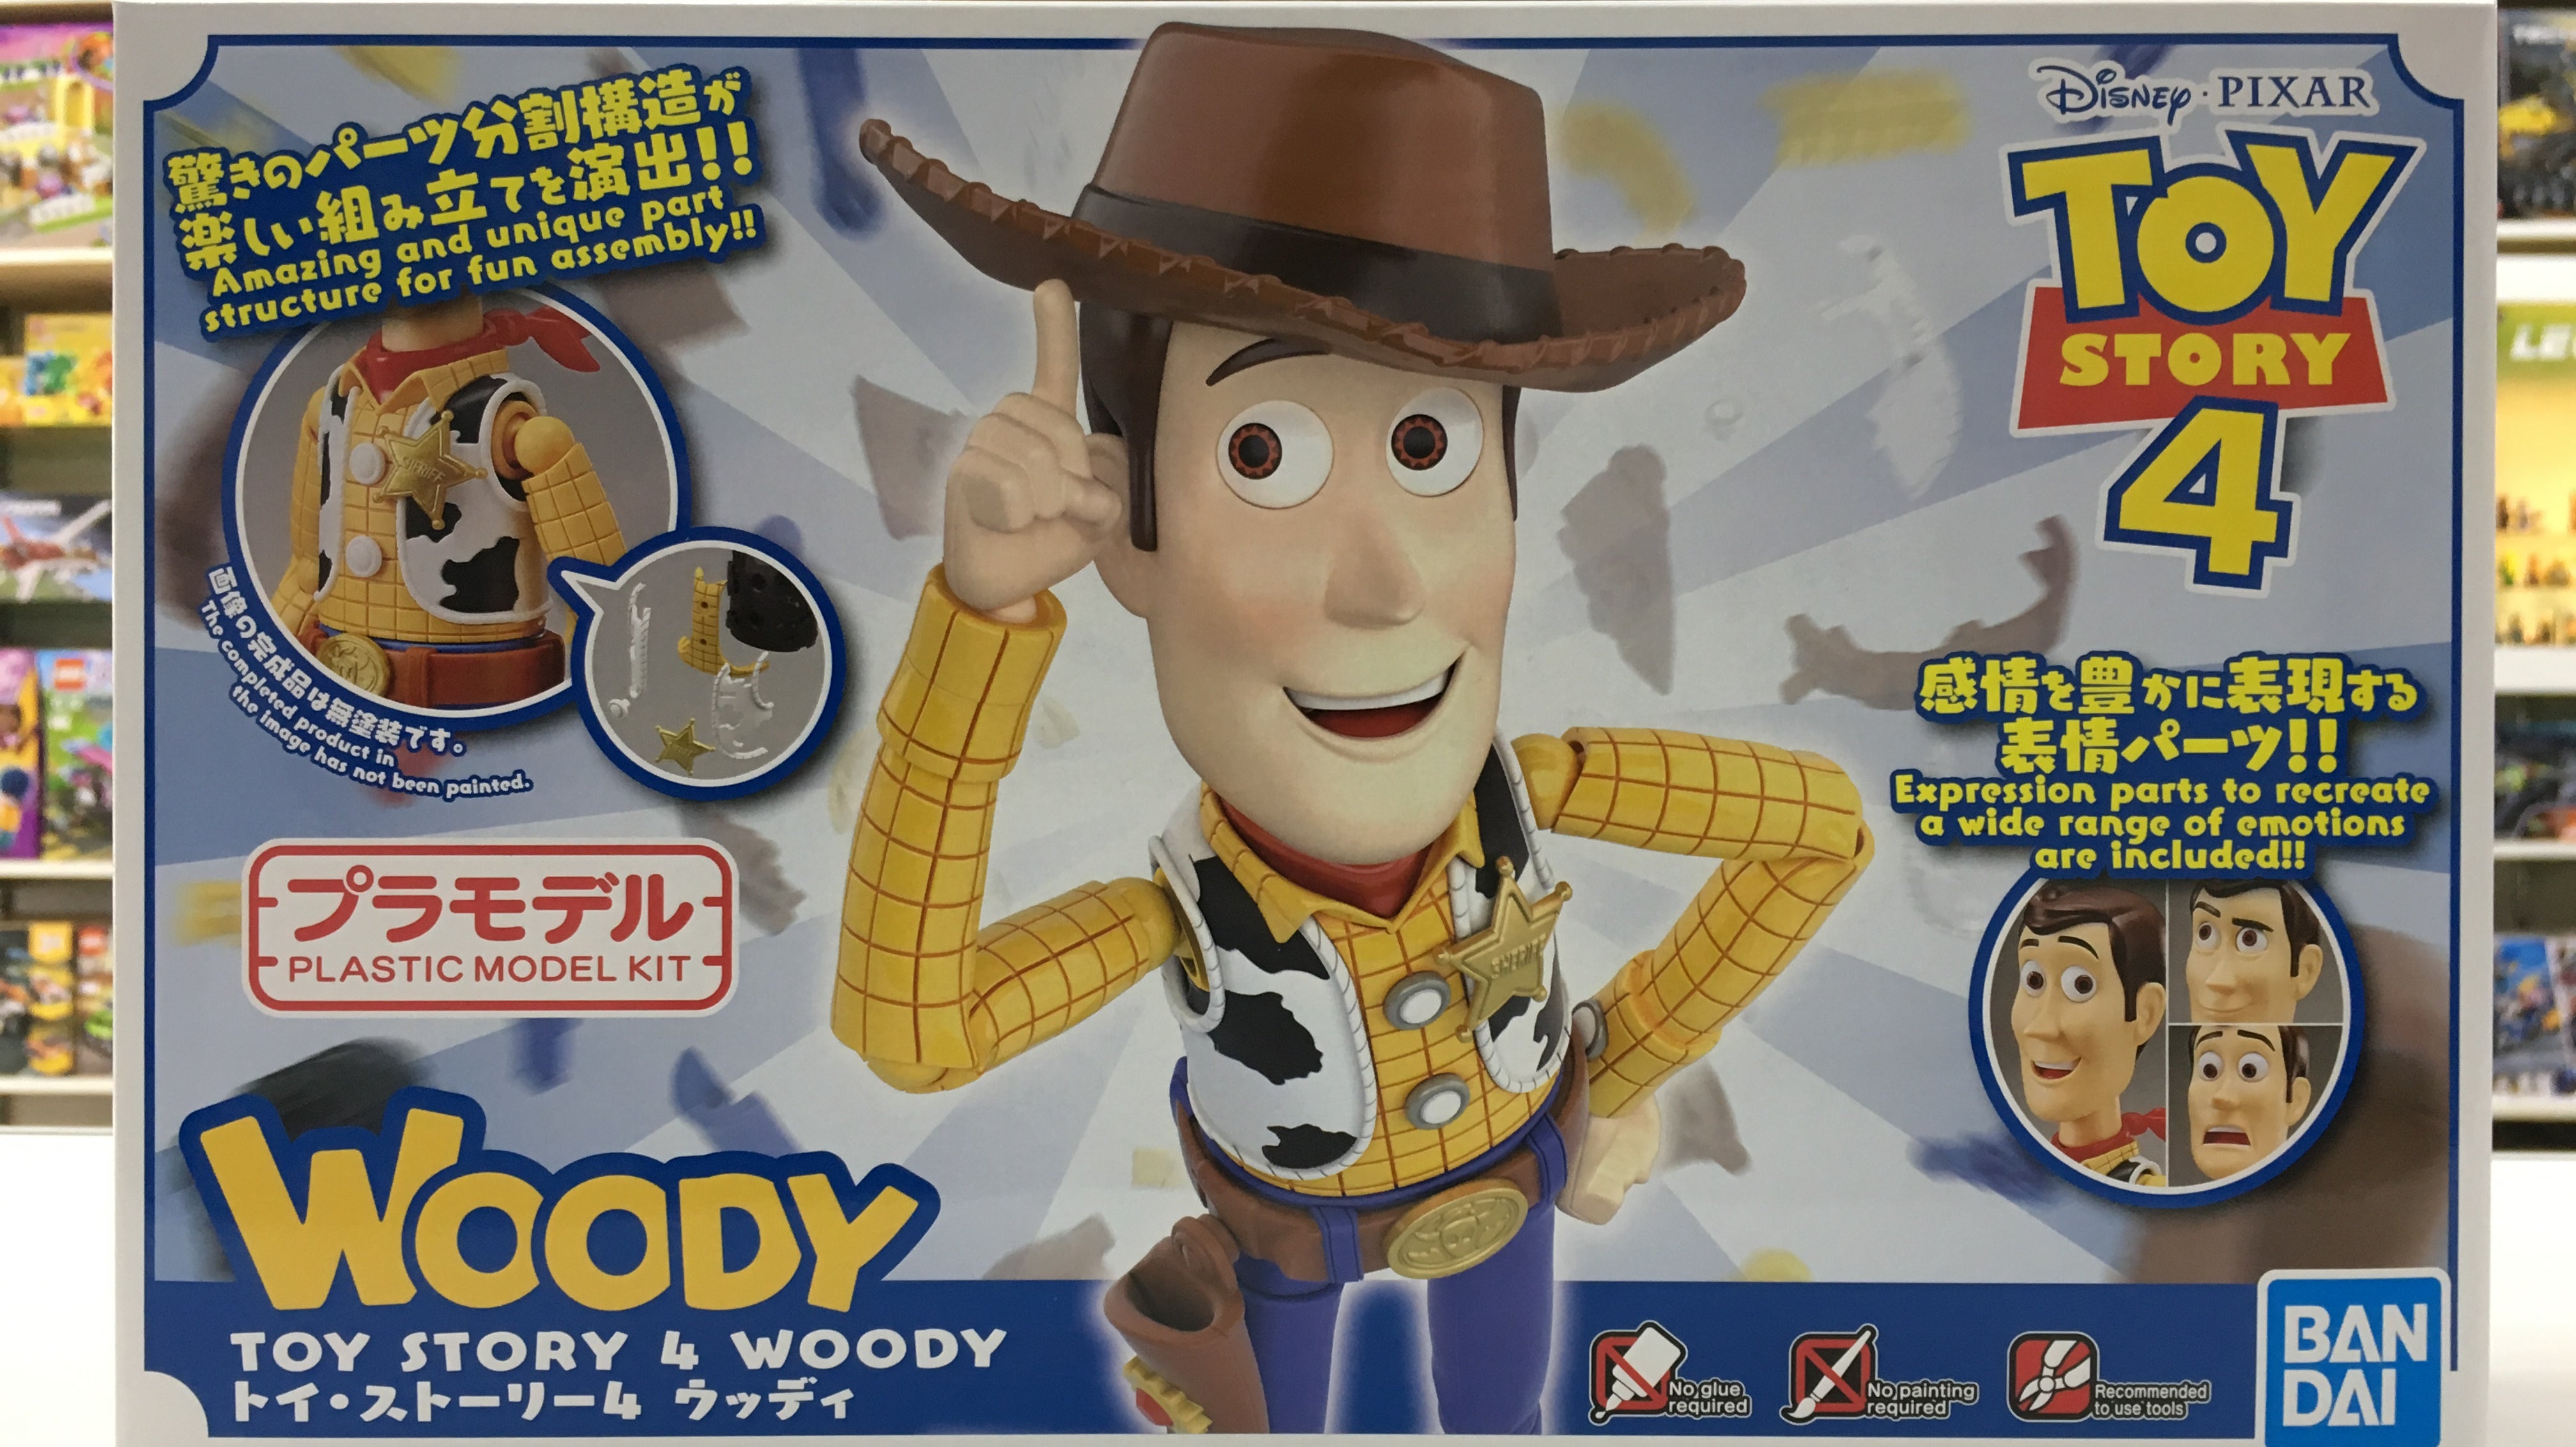 Cinema-Rise Standard Toy Story 4 Woody